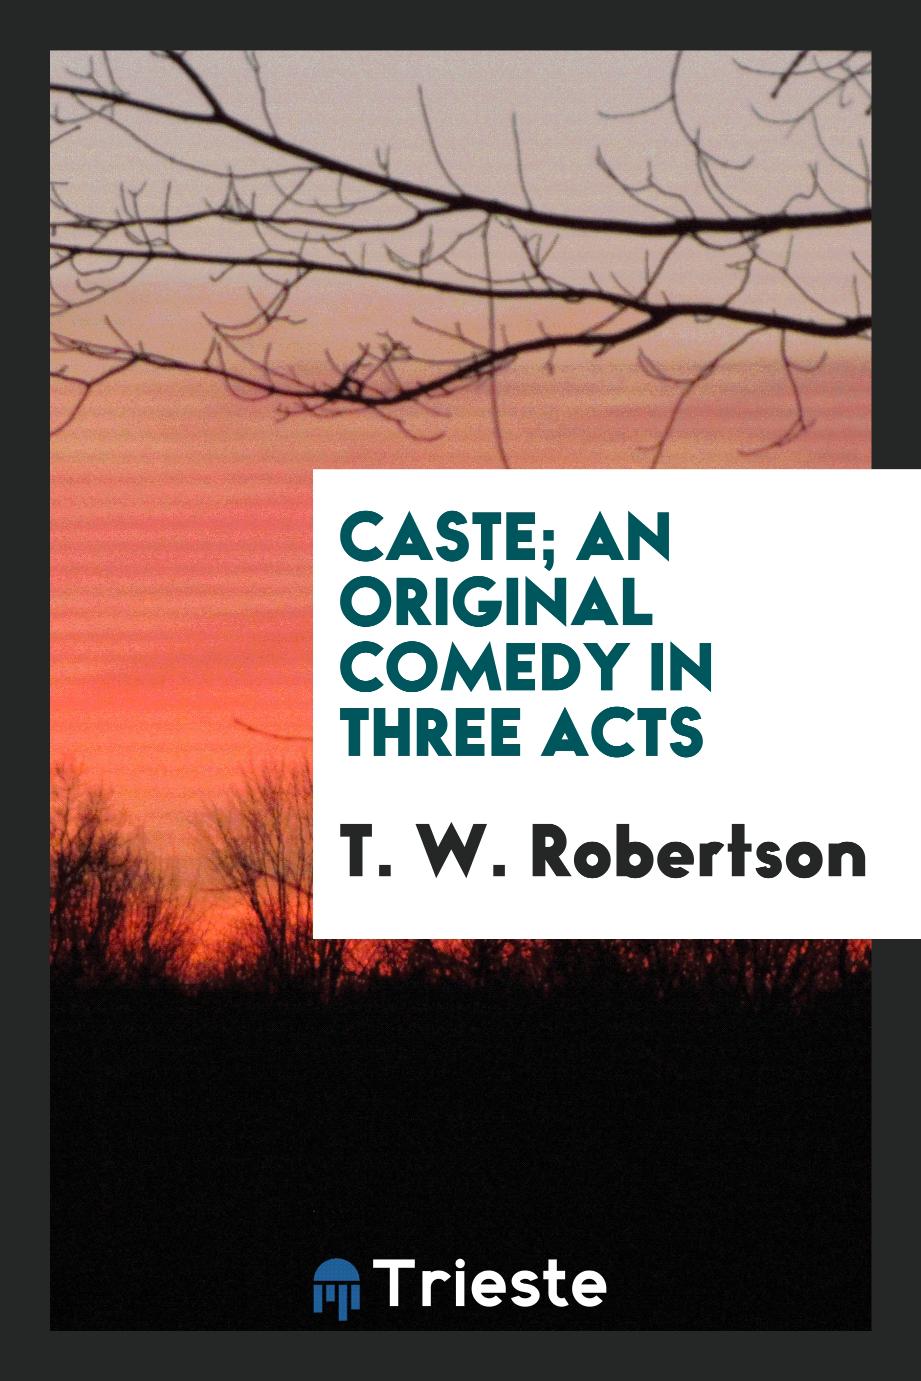 Caste; an original comedy in three acts